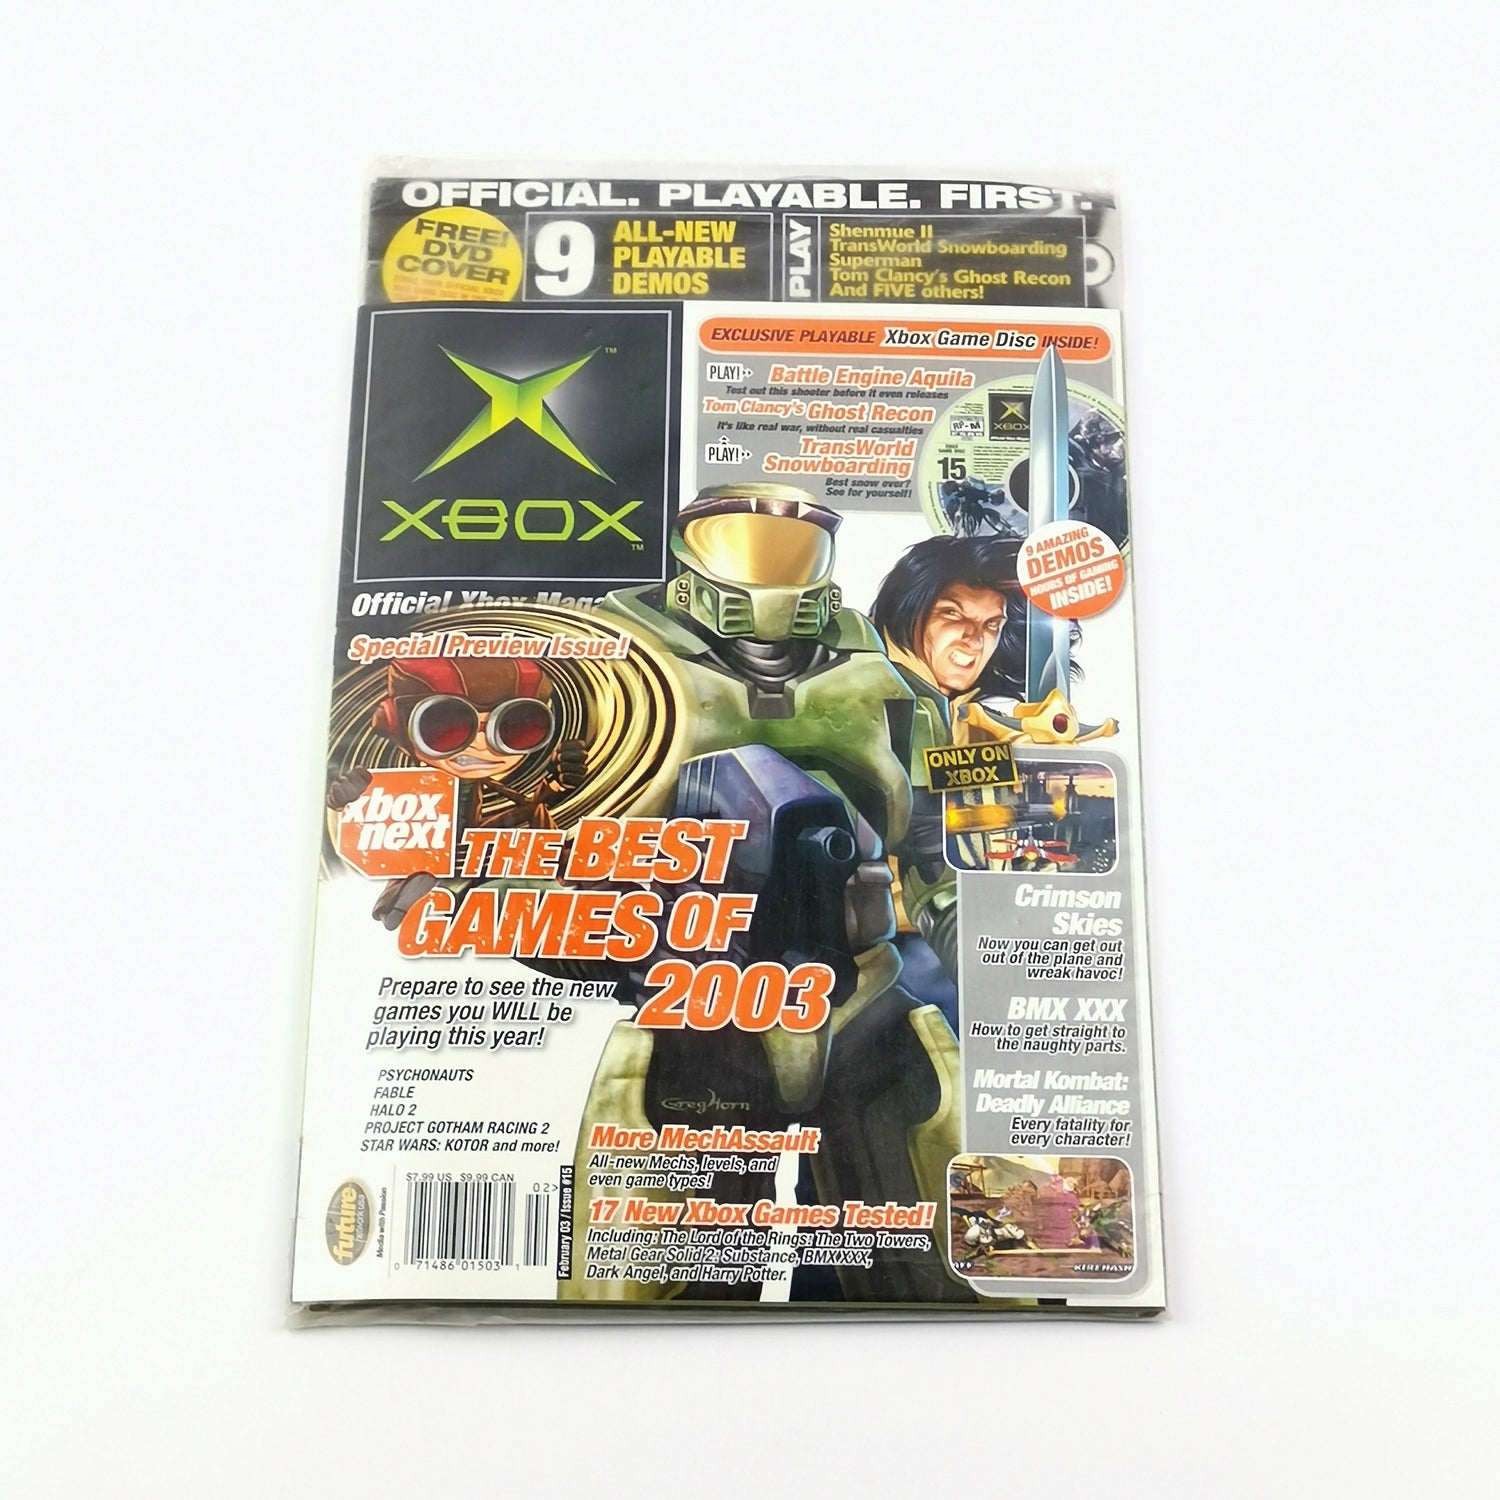 Xbox Classic magazine The Best Games of 2003 including demo - NEW in foil